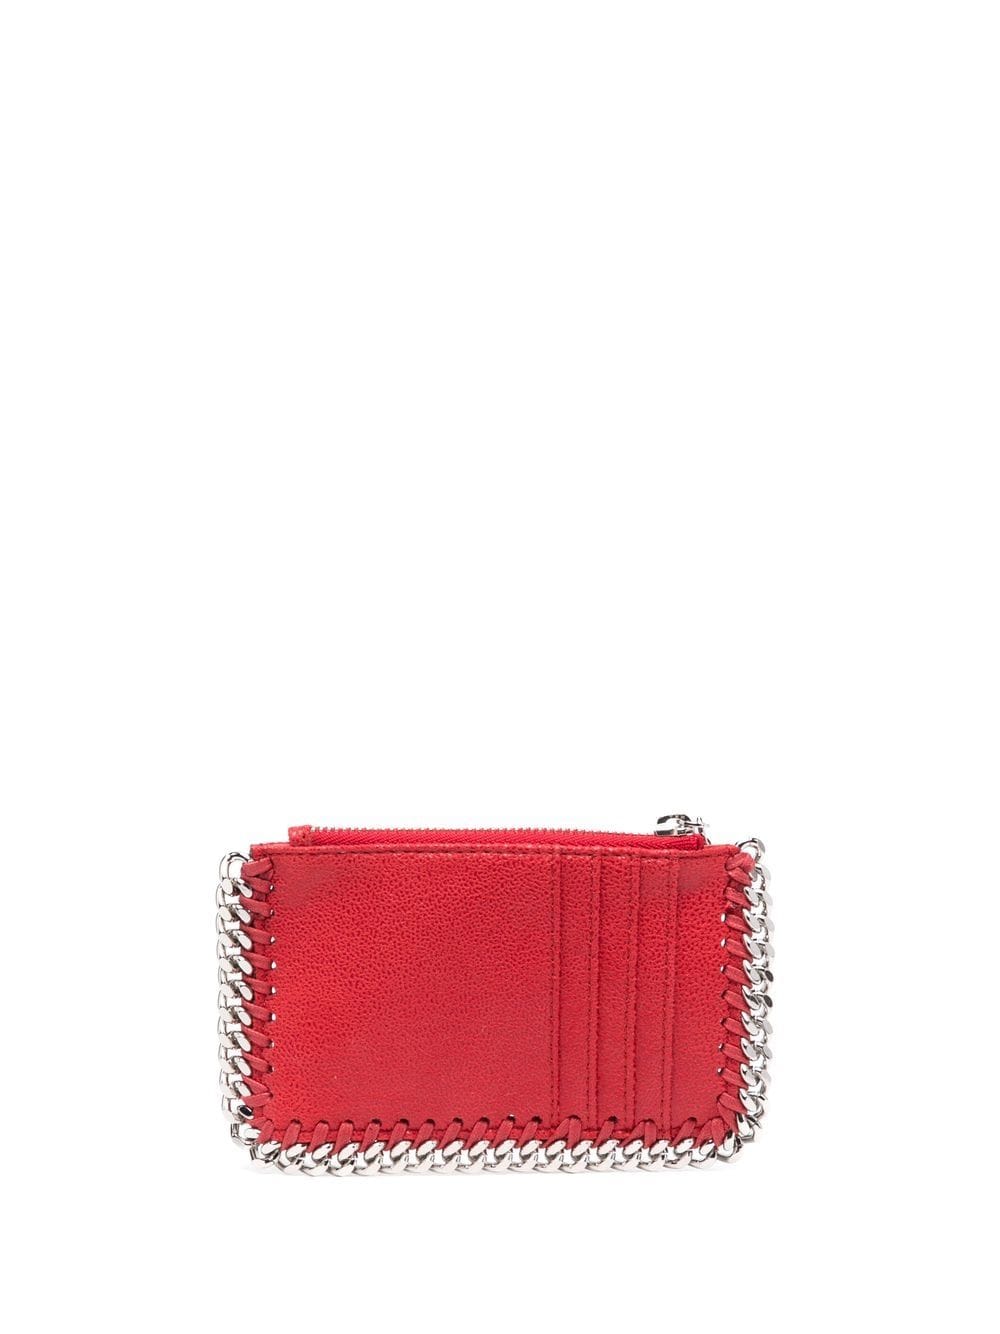 CHAIN-LINK FAUX-LEATHER PURSE